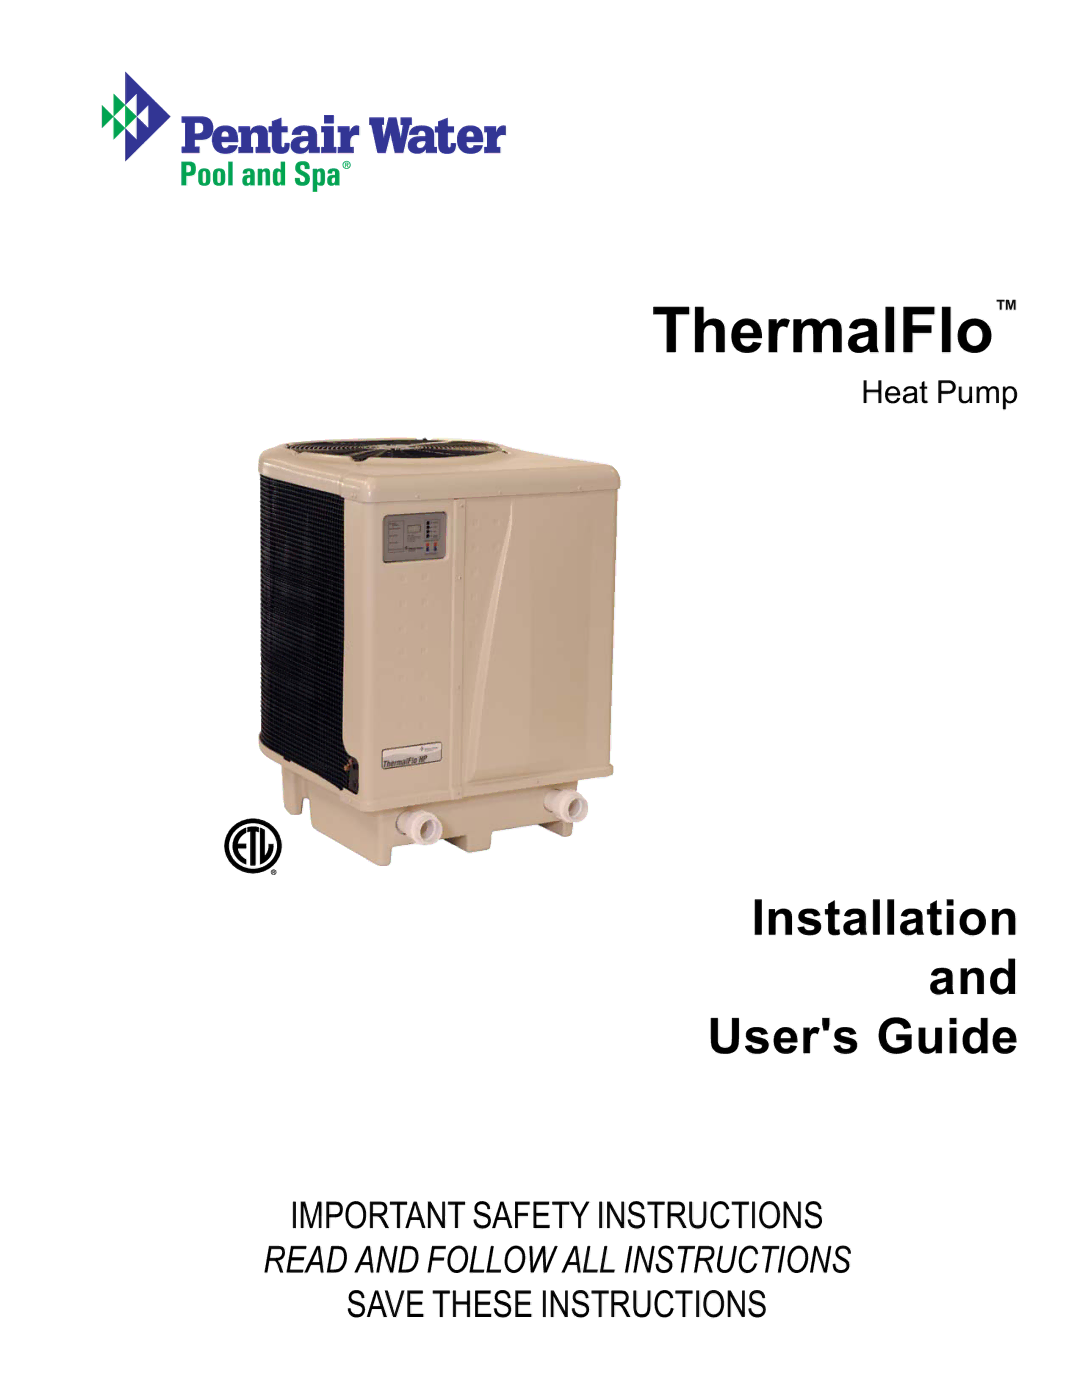 Pentair ThermalFlo important safety instructions 